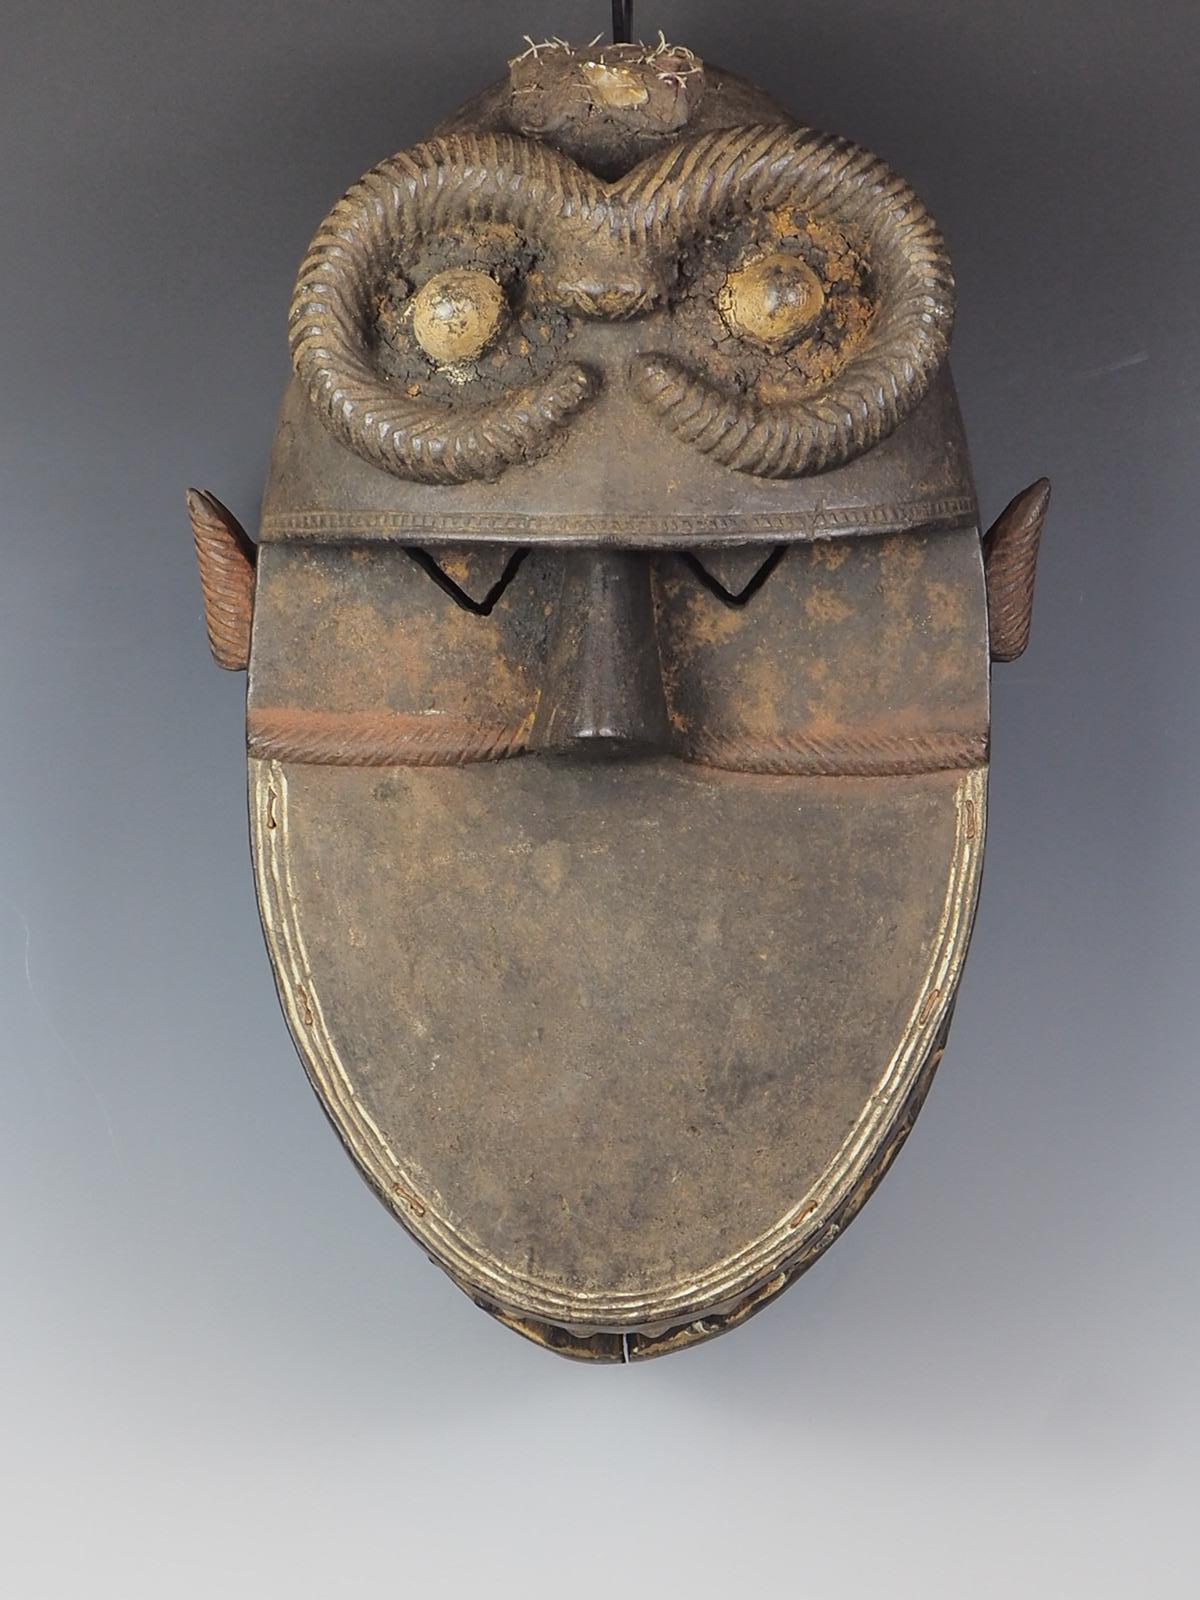 African Toma Tribal Initiation Ceremonial Mask From Liberia (Guinea)

From the Tribal people of Liberia (Guinea, Africa)

Initiation masks were used by secret male socity know as Poro